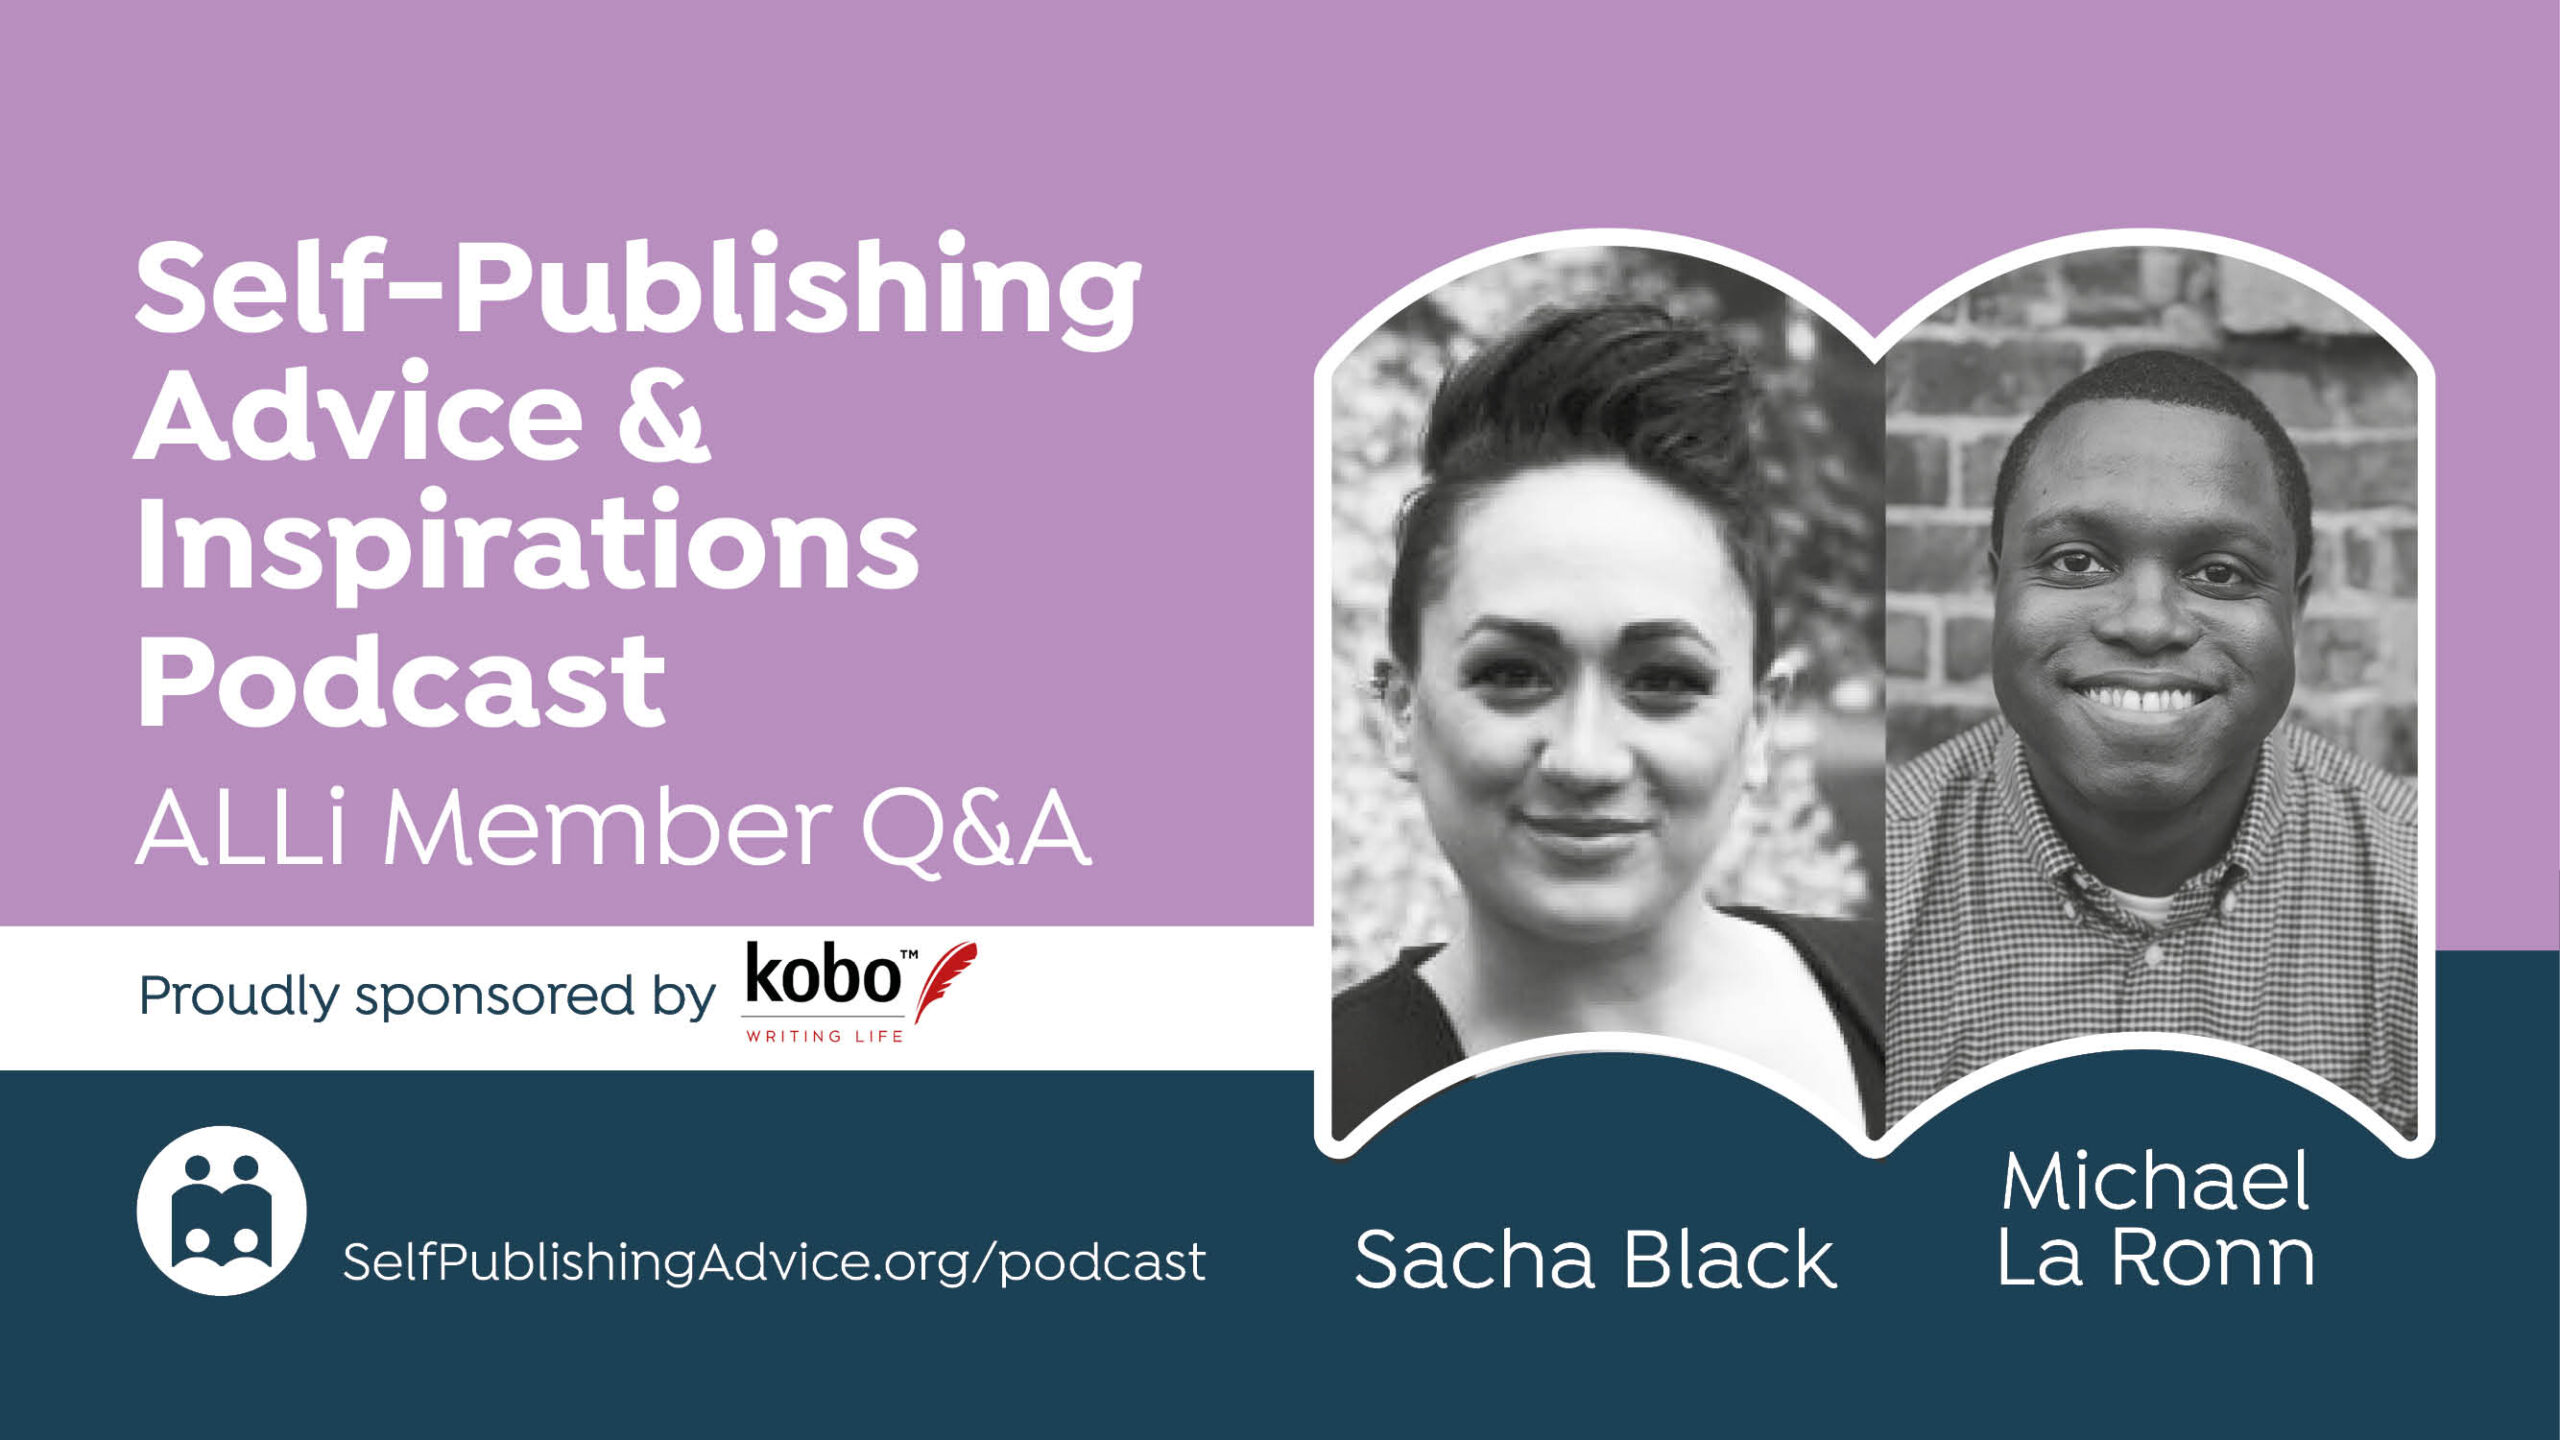 Do I Need A Developmental Editor? How Do I Launch A Kickstarter? More Questions Answered By Michael La Ronn And Sacha Black In Our Member Q&A Podcast